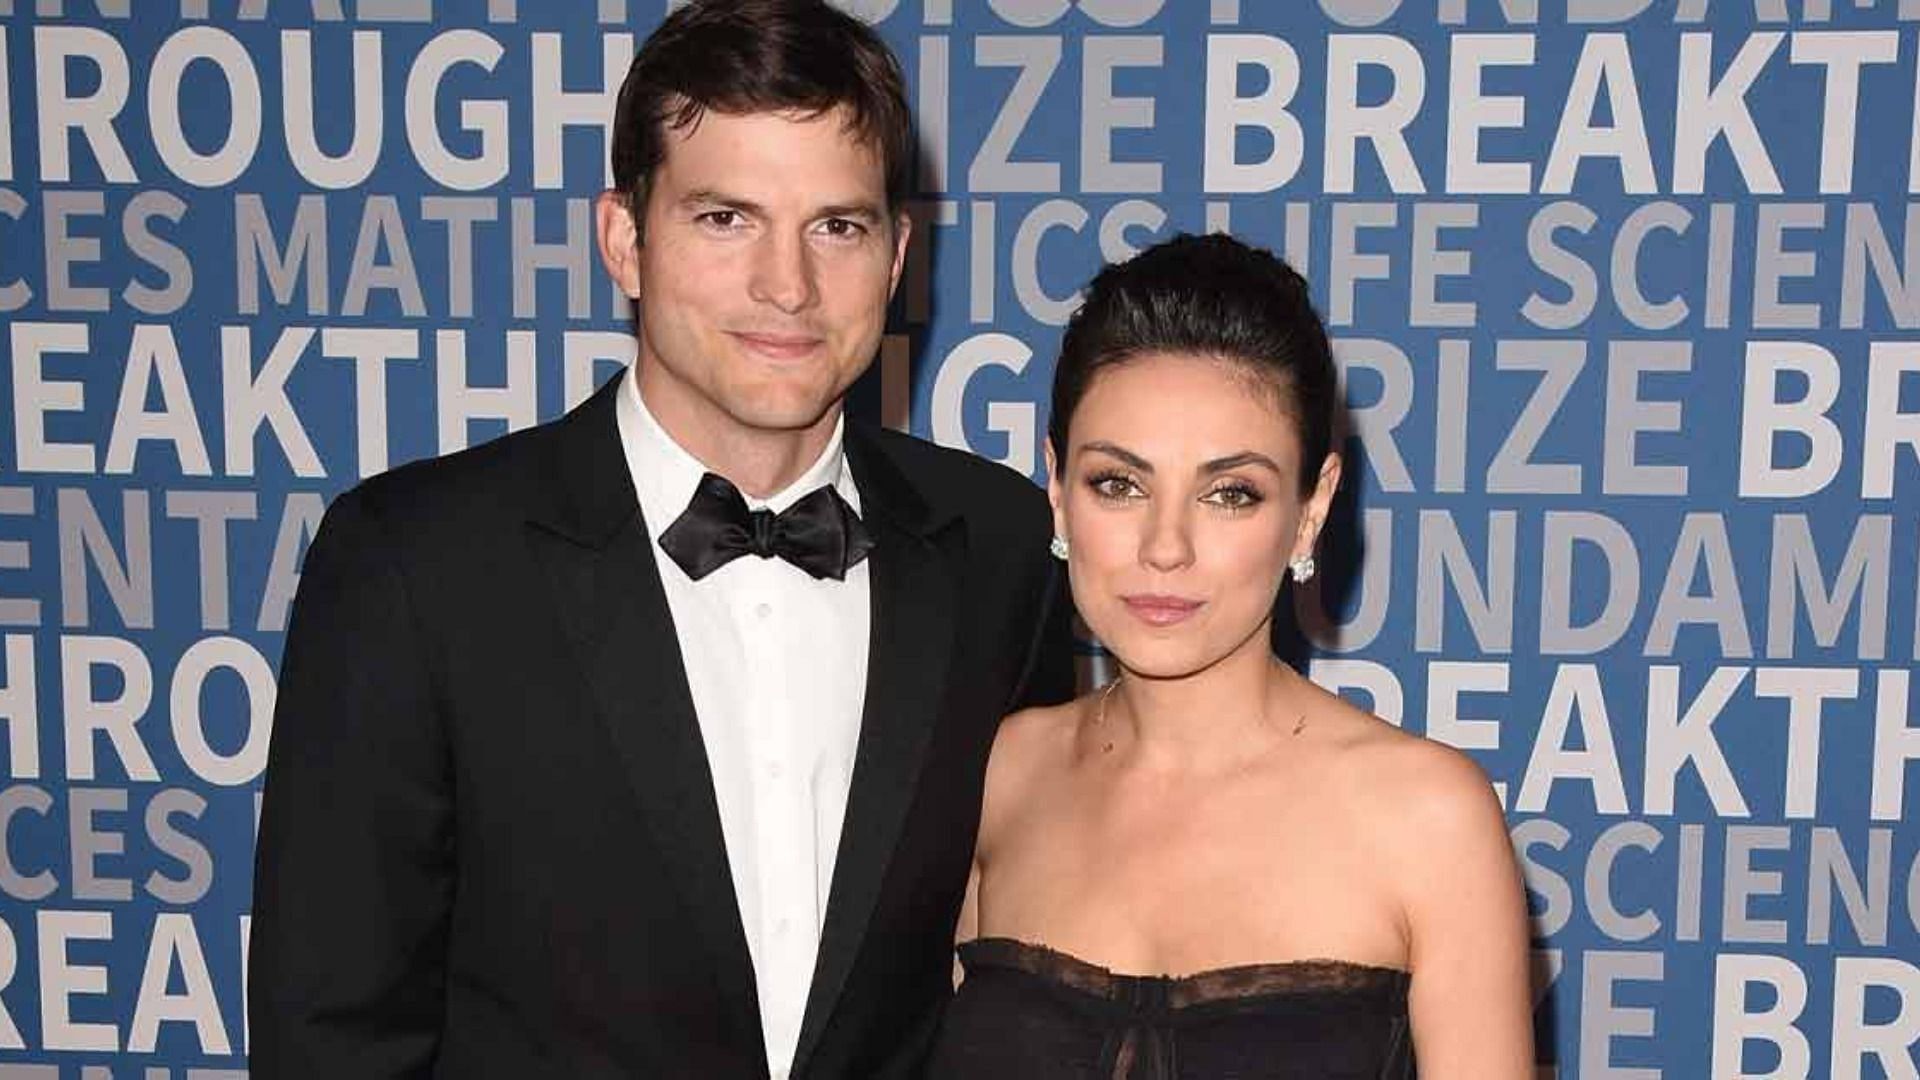 Kunis and Kutcher will match up to $3 million in donations (Image via Getty Images)